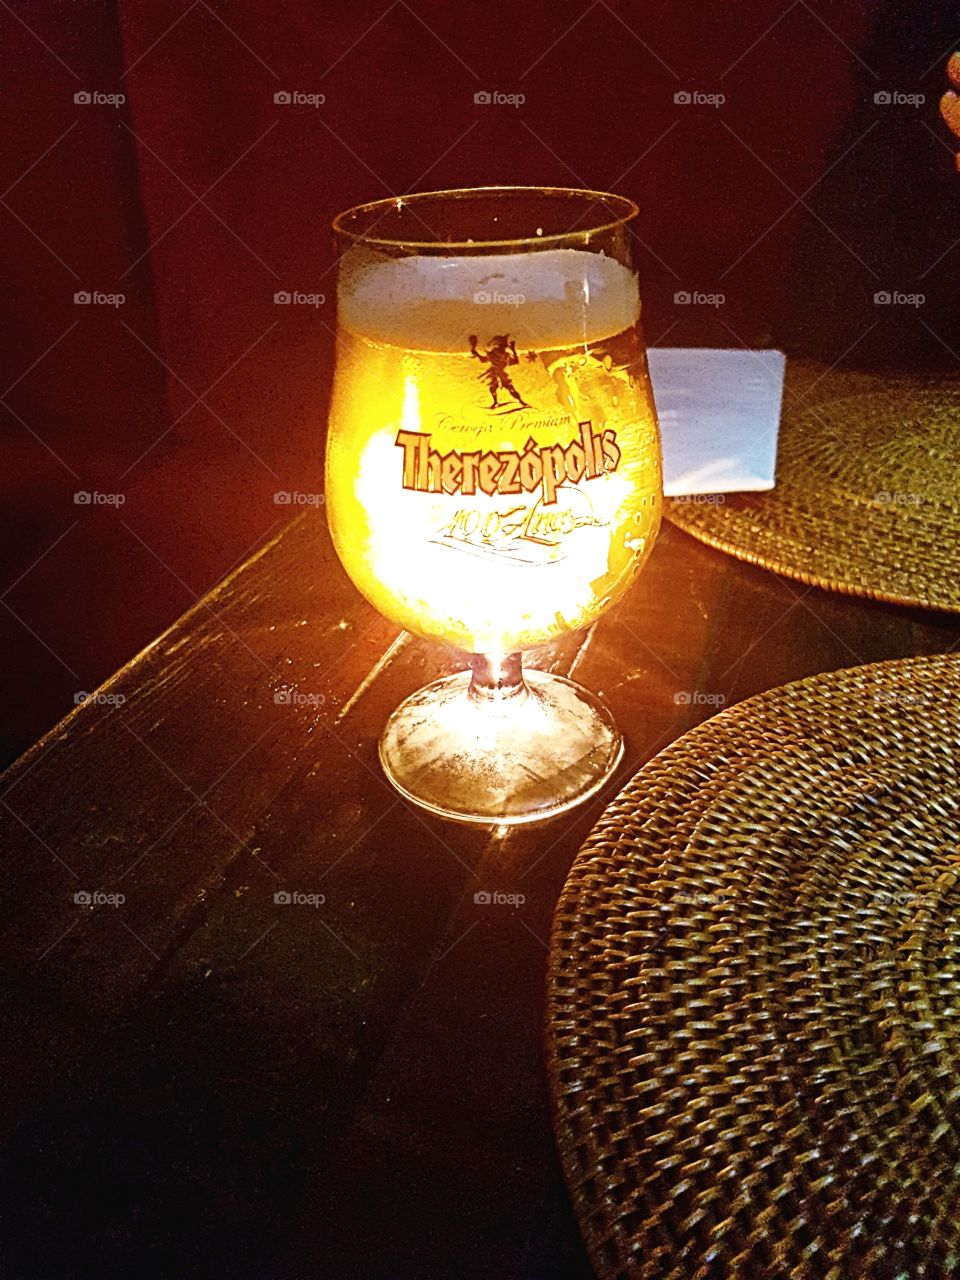 Just a beer and a candle on a table in a small restaurant.